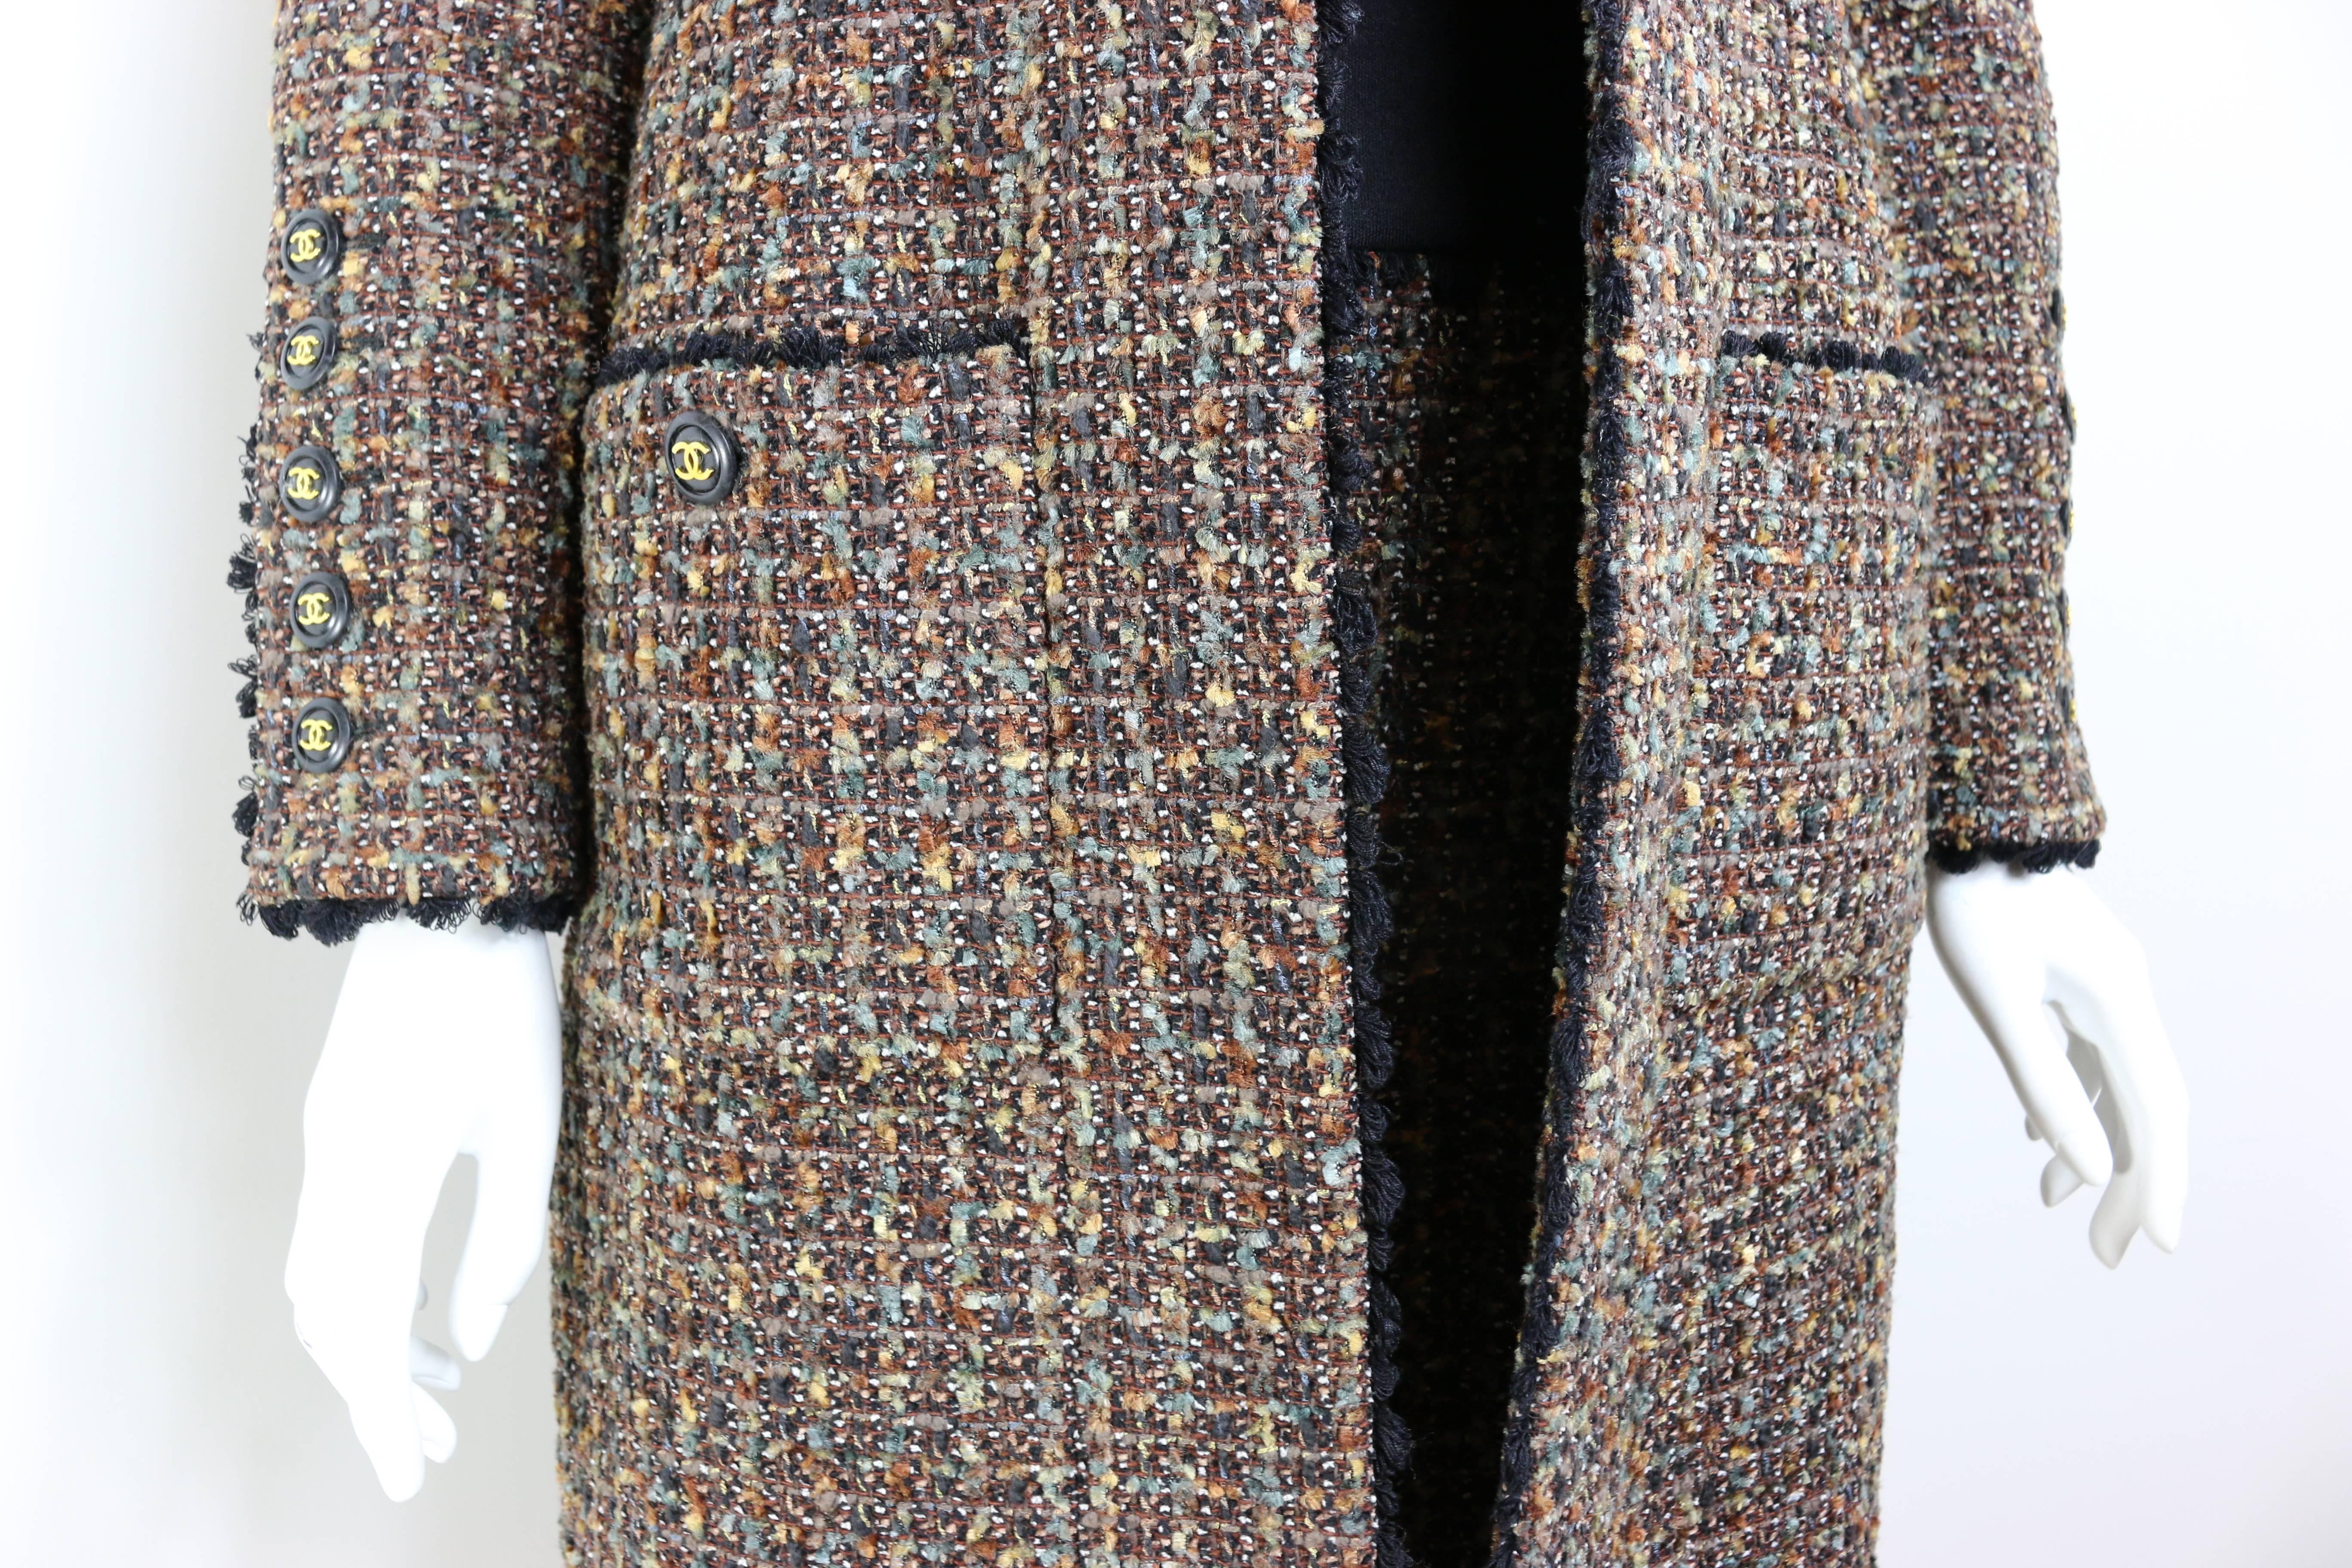 - Vintage Chanel brown/yellow/green/white/black wool tweed long coat and dress from fall 1994 collection. 

- Featuring four front pockets buttons and five buttons on each cuff. 

- Straight lined coat. 

- Black trimming throughout the coat and